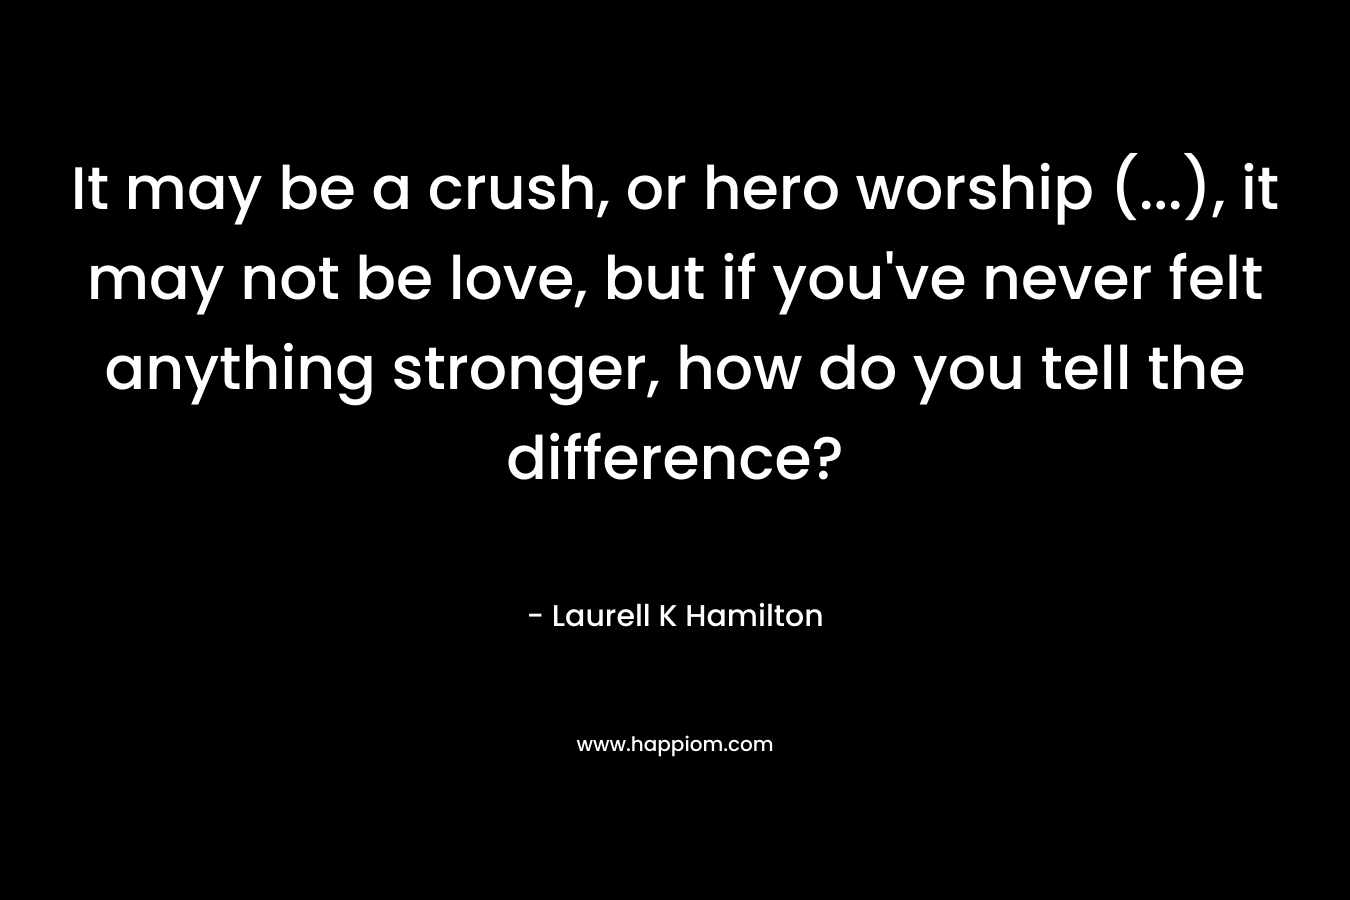 It may be a crush, or hero worship (…), it may not be love, but if you’ve never felt anything stronger, how do you tell the difference? – Laurell K Hamilton